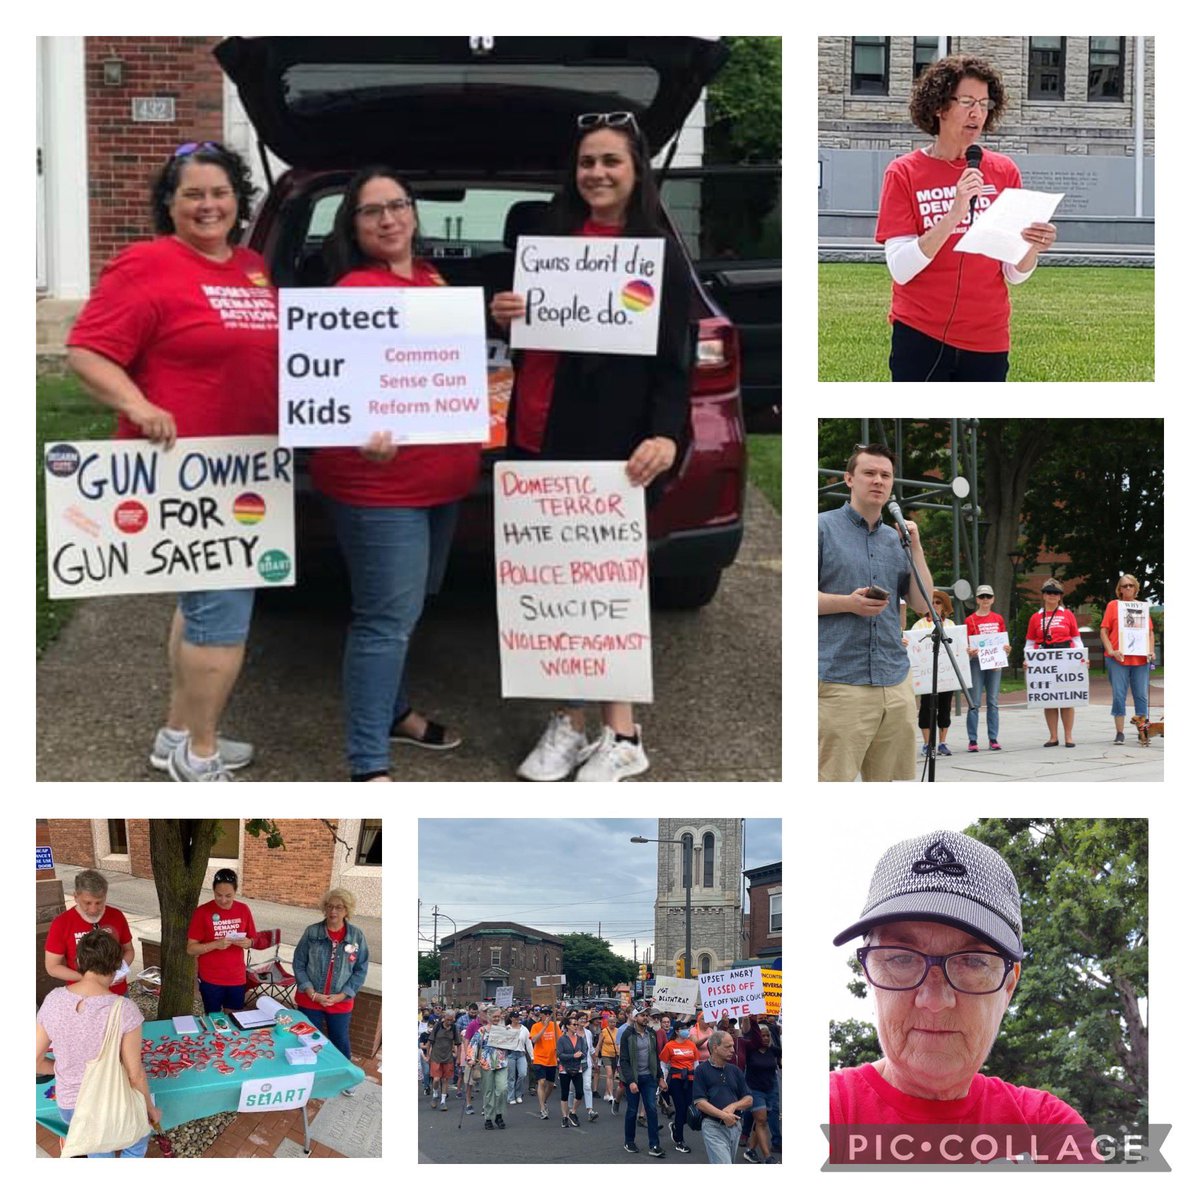 📍 Wilkes-Barre 📍 Erie 📍 Bethlehem 📍 West Philly 📍 Bloomsburg 📍 Scranton 📍 Pittsburgh 📍 West Chester 📍 and even DC! At @AMarch4OurLives events across the state, PA @MomsDemand volunteers showed up to call on Congress to do something about gun violence #DontLookAway #paleg